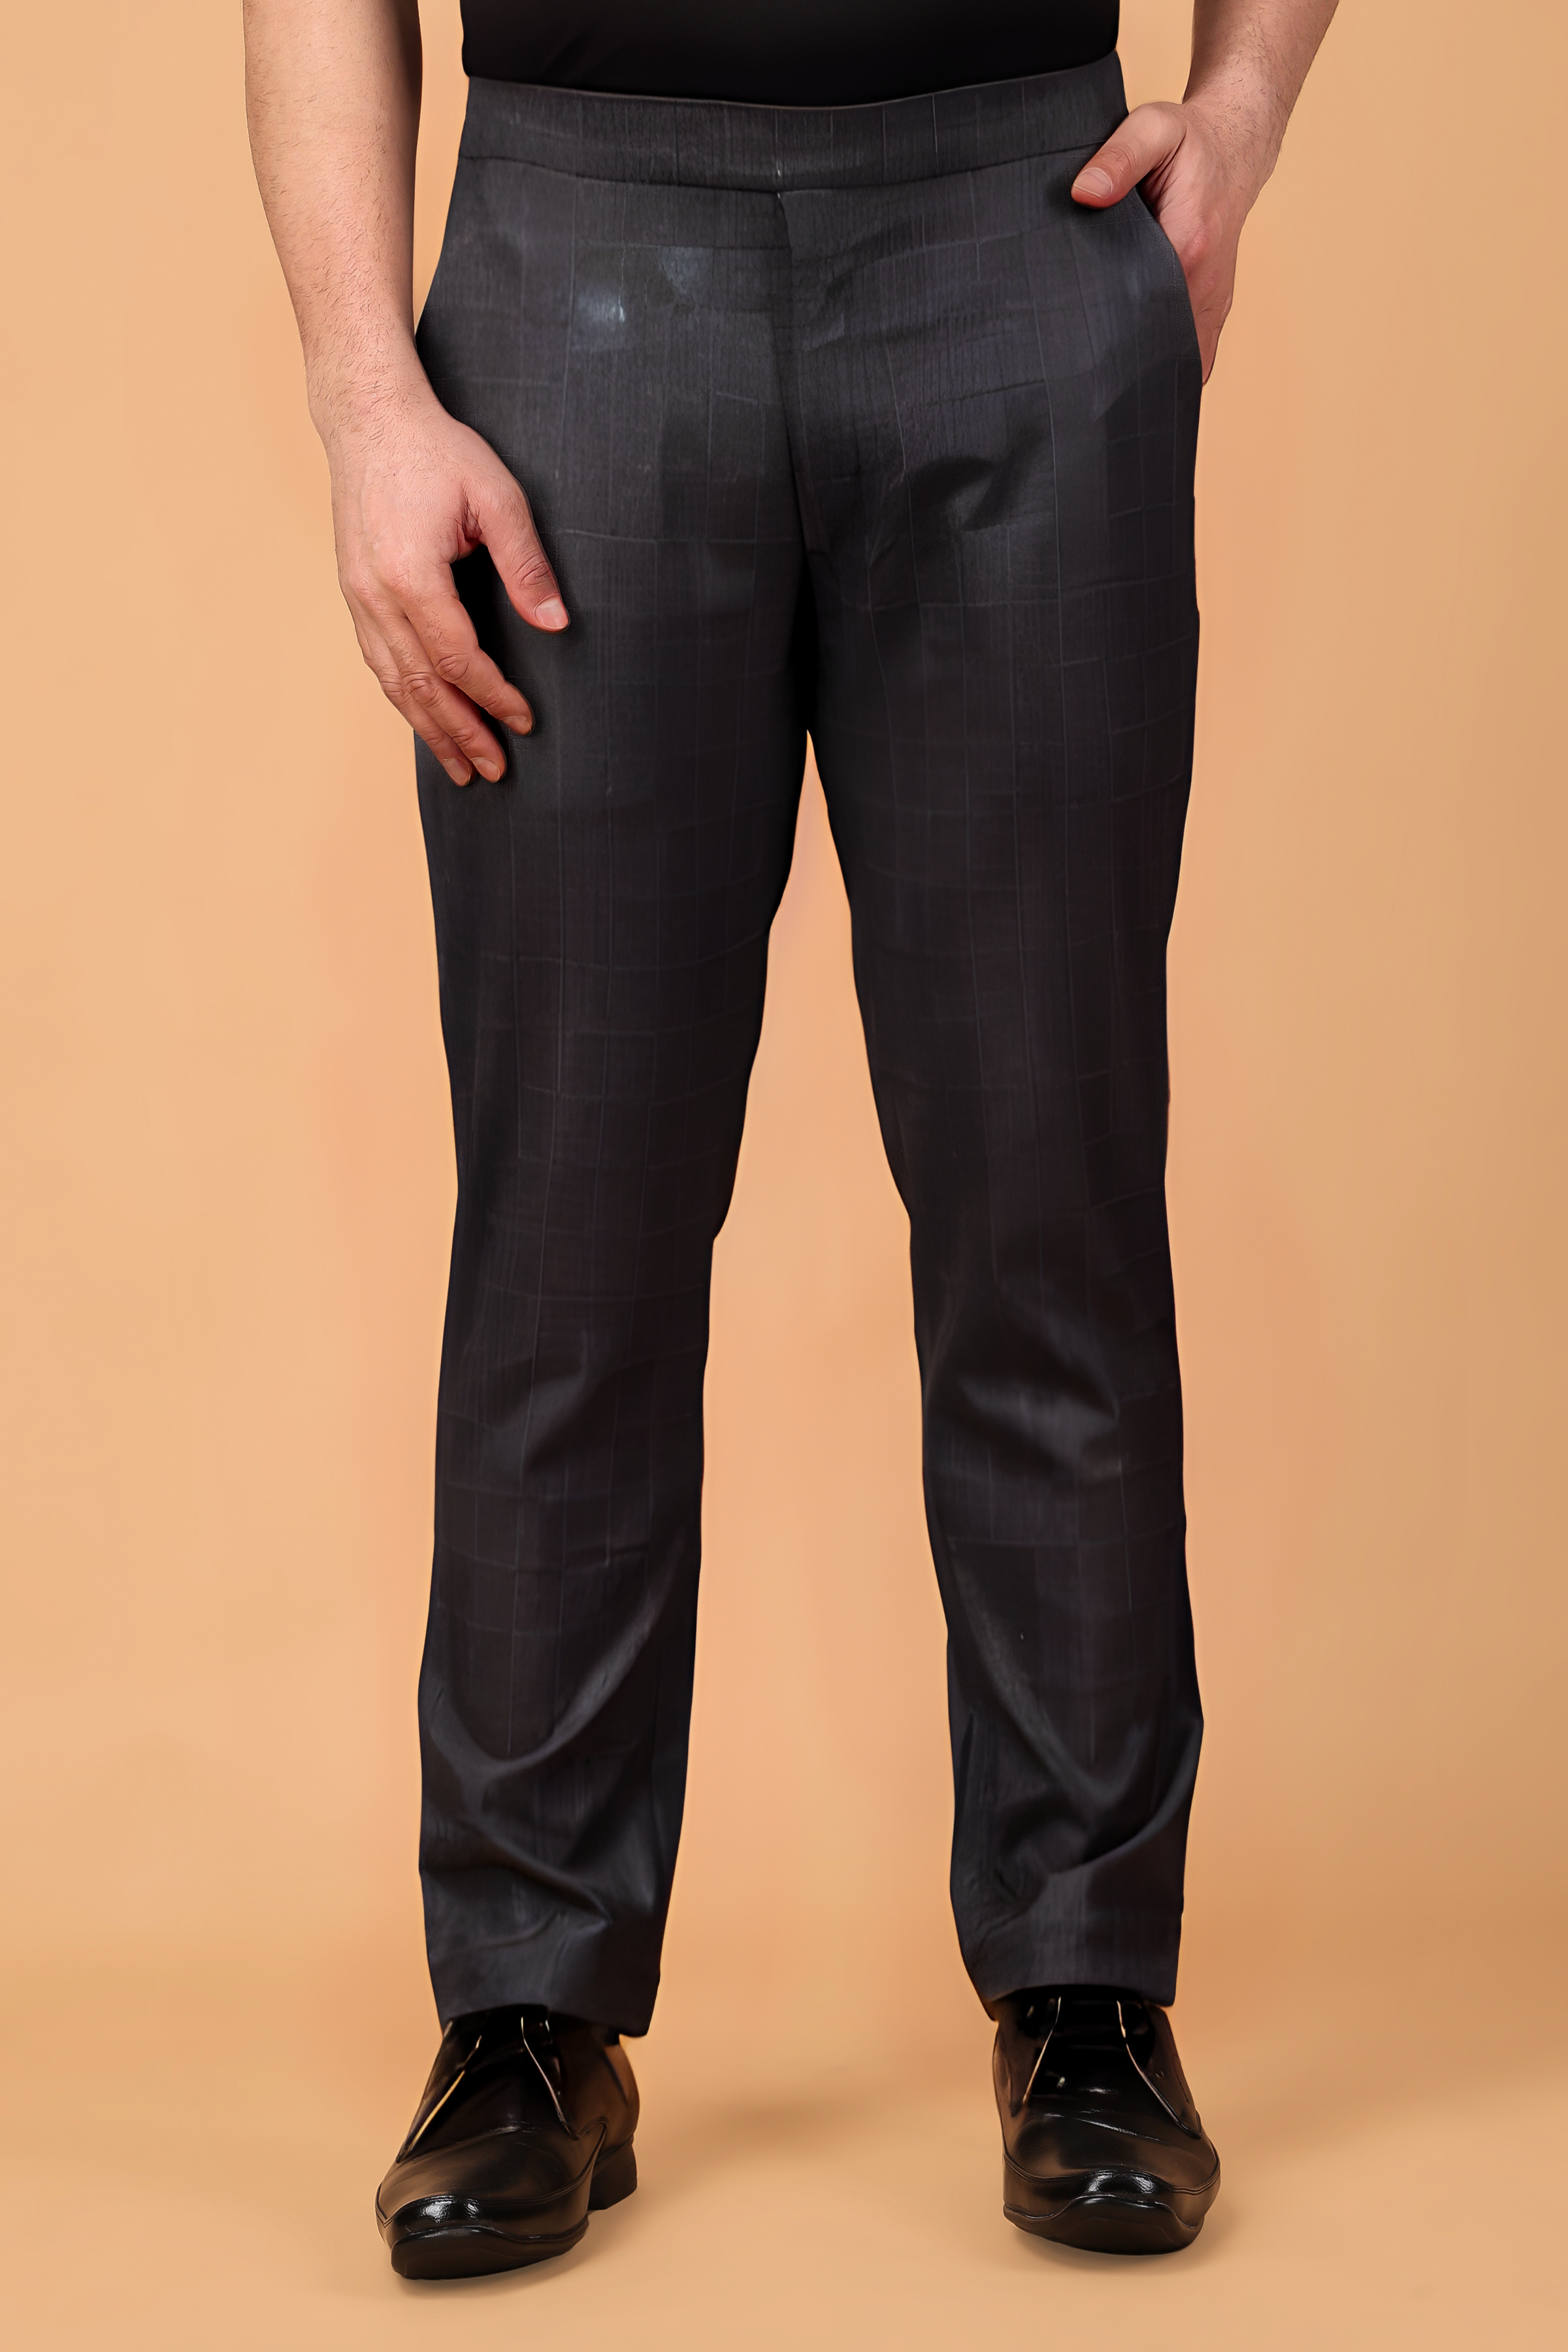 Beige Textured Full Length Casual Men Comfort Fit Trousers - Selling Fast  at Pantaloons.com